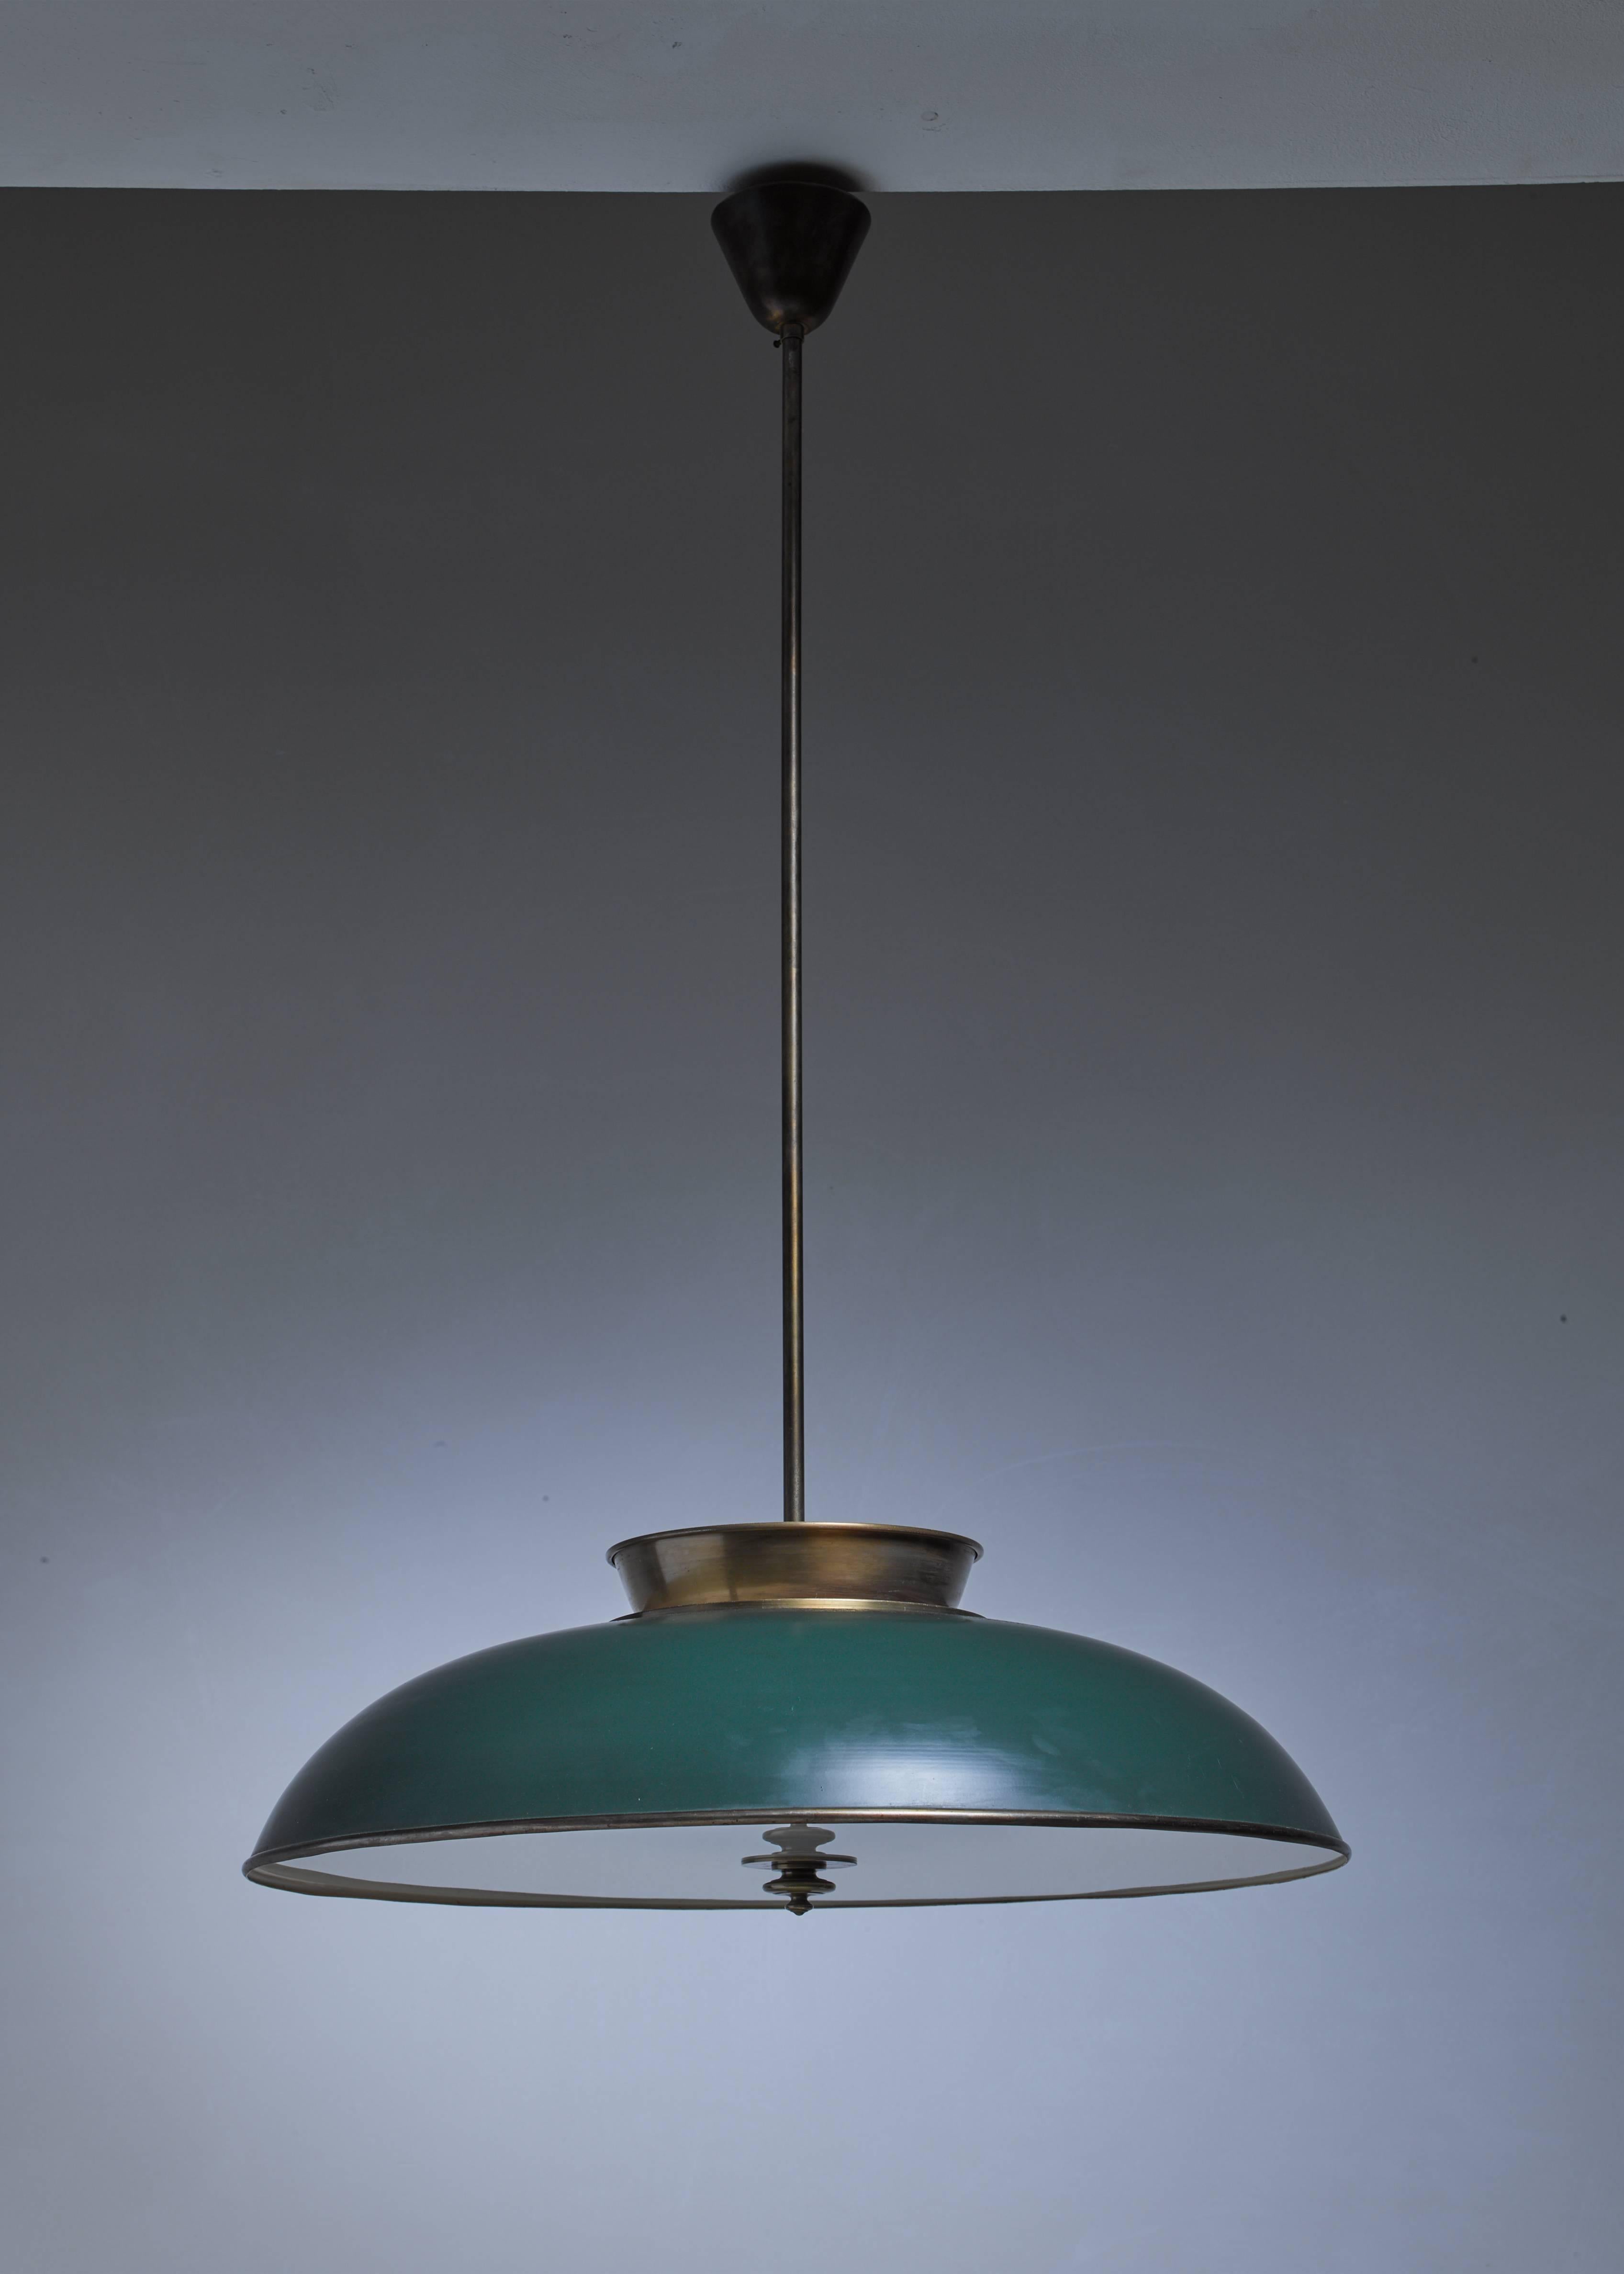 An early Modernist Swedish pendant lamp by Harald Notini made of brass with a frosted glass diffuser. Part of the shade is lacquered green and the lamp hangs from a long brass stem. The lamp has six-light bulbs inside and two on top of the lamp.
